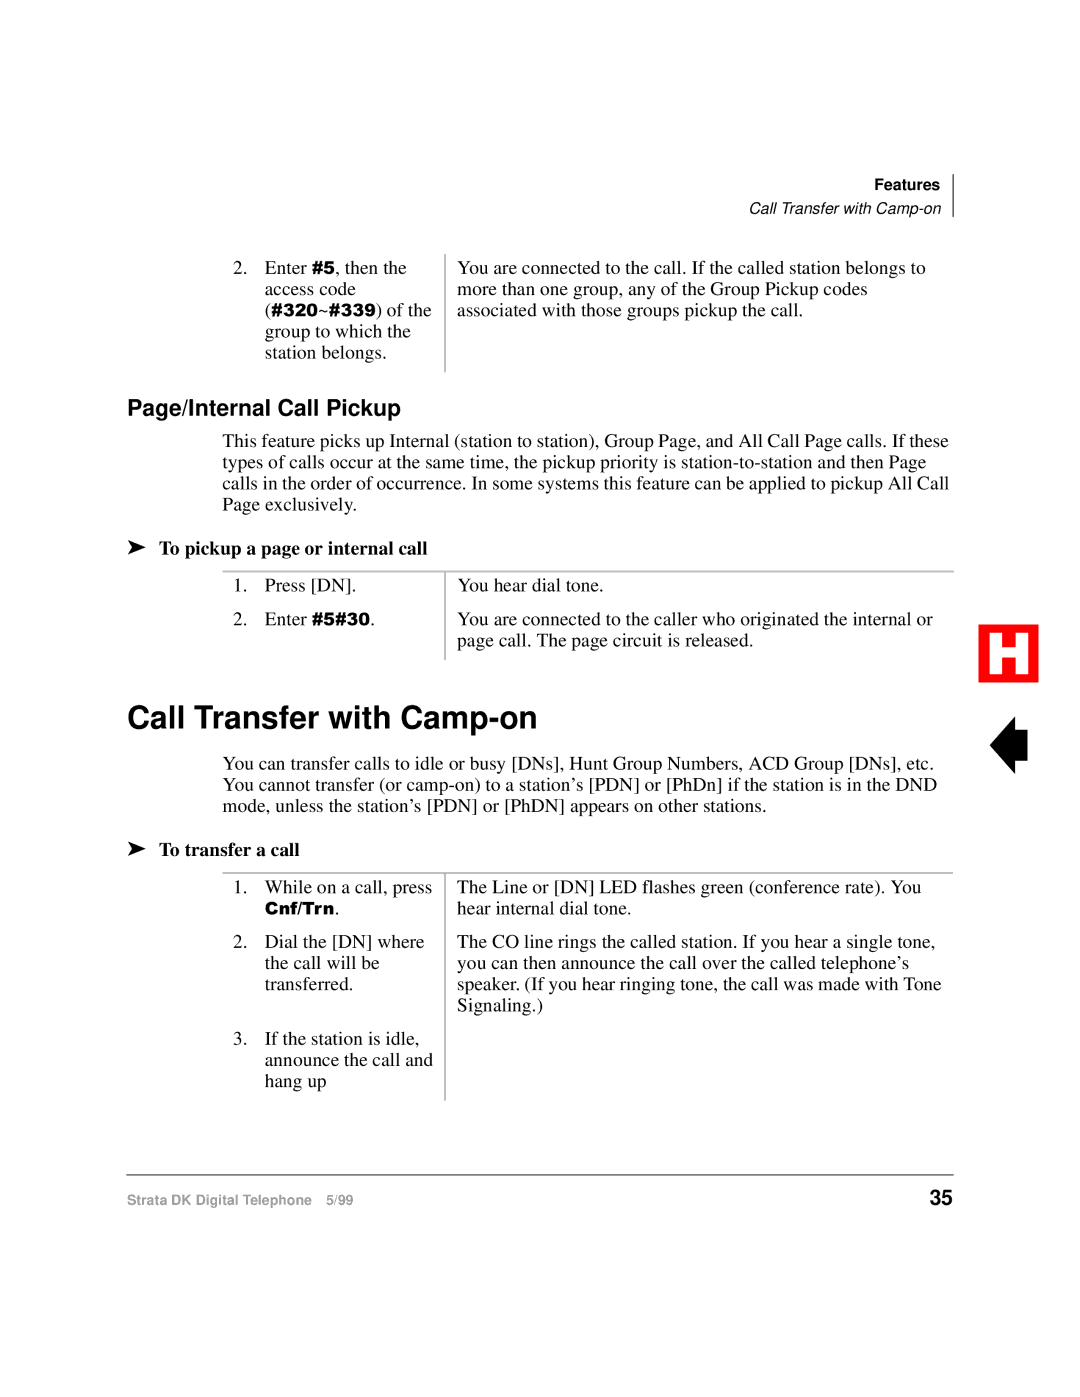 Toshiba Digital Telephone manual Call Transfer with Camp-on, Page/Internal Call Pickup, To pickup a page or internal call 